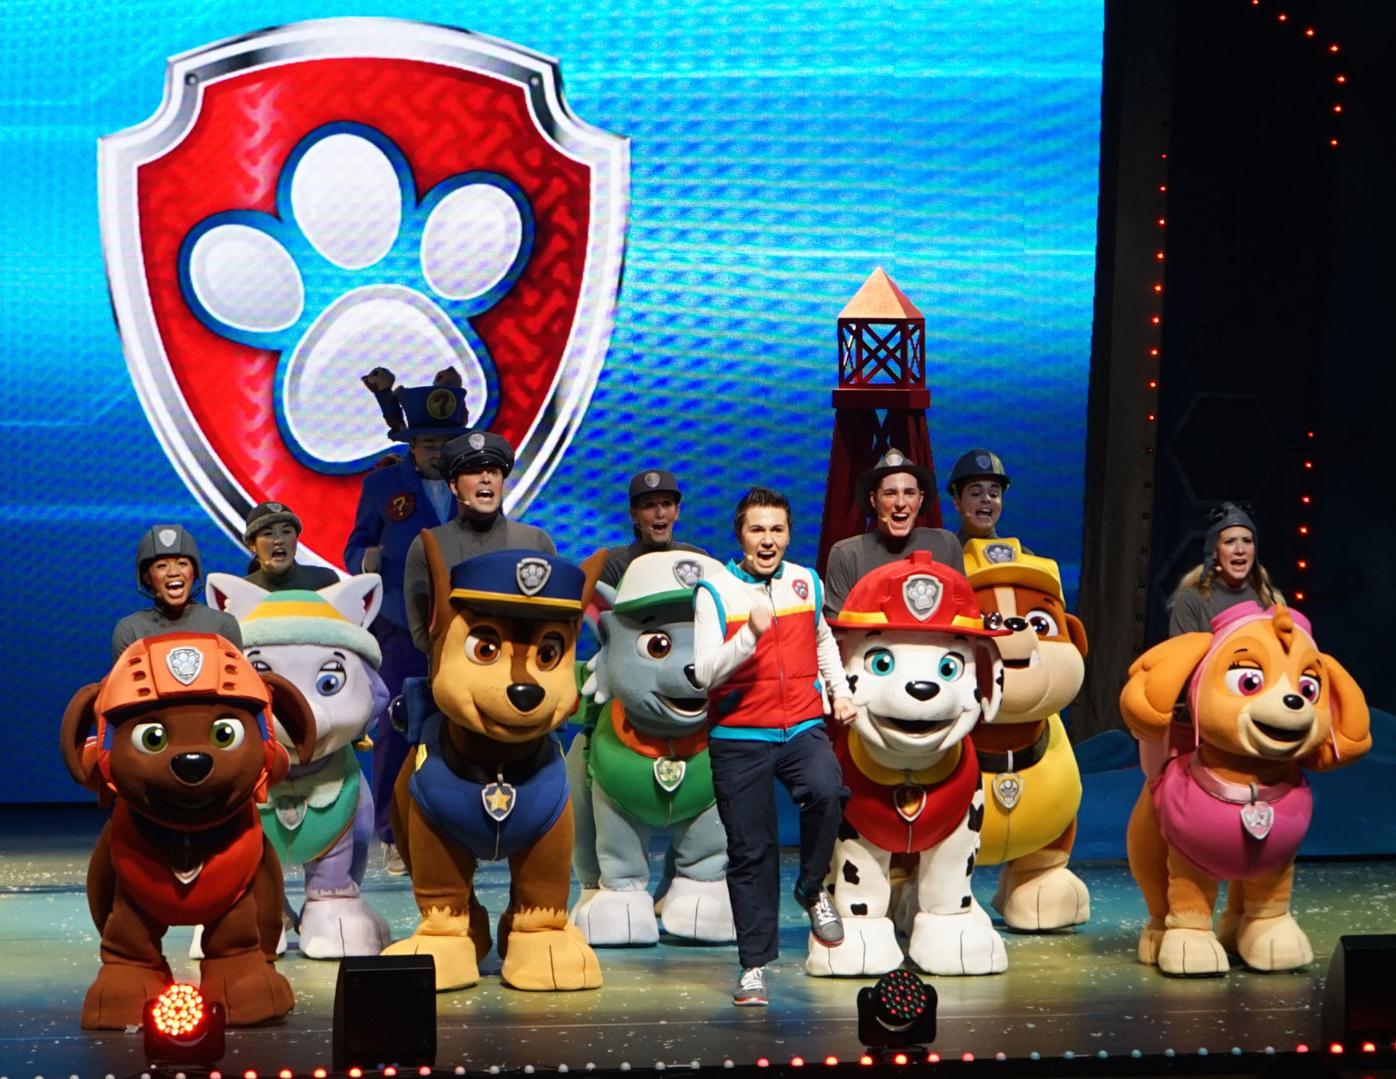 Paw Patrol Live! to save day at the WVU Creative Arts Center on 18-19 Pulse | wvnews.com